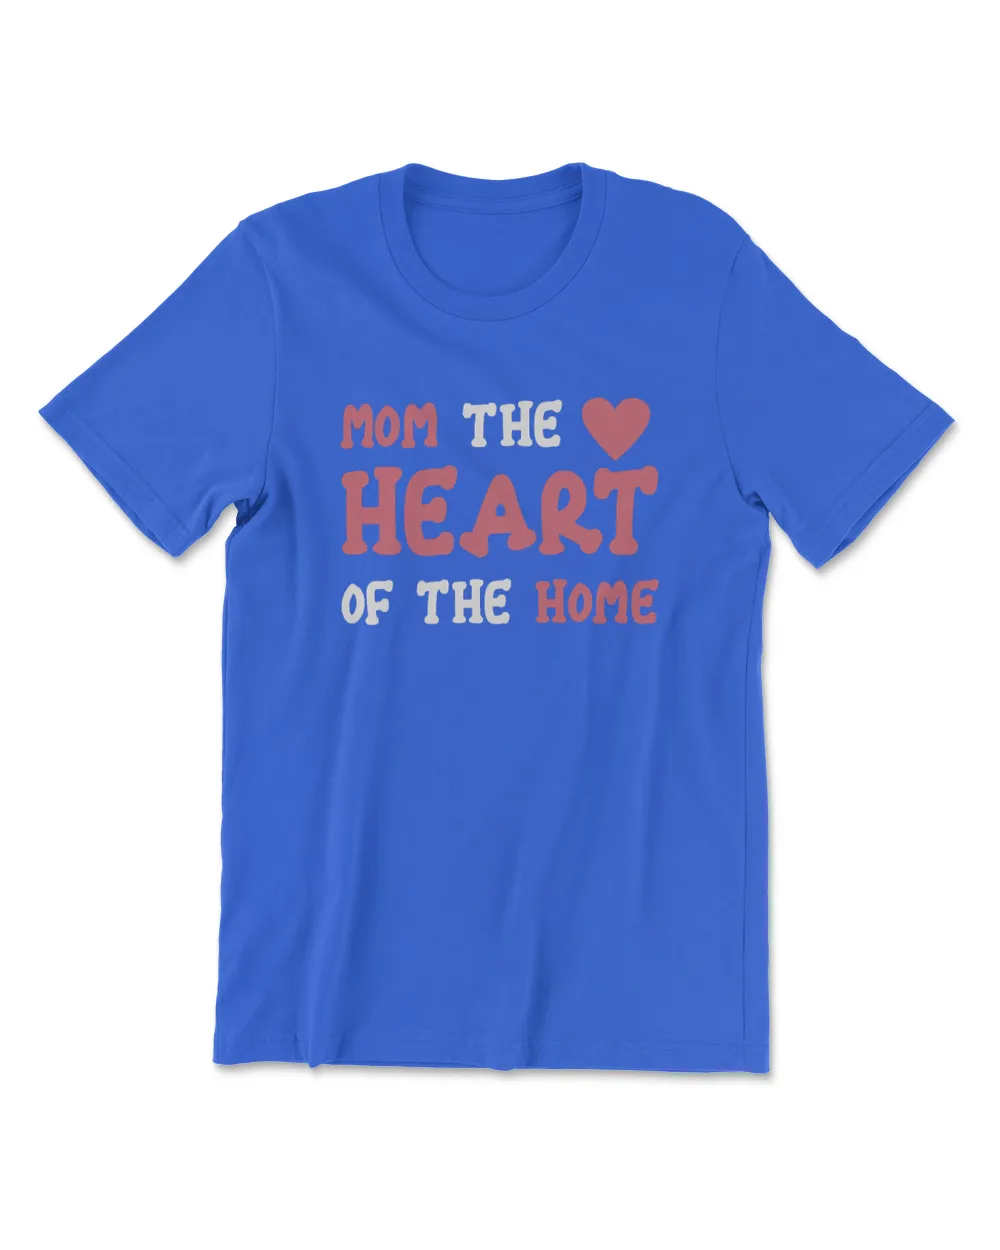 Mom the heart of the home t shirt